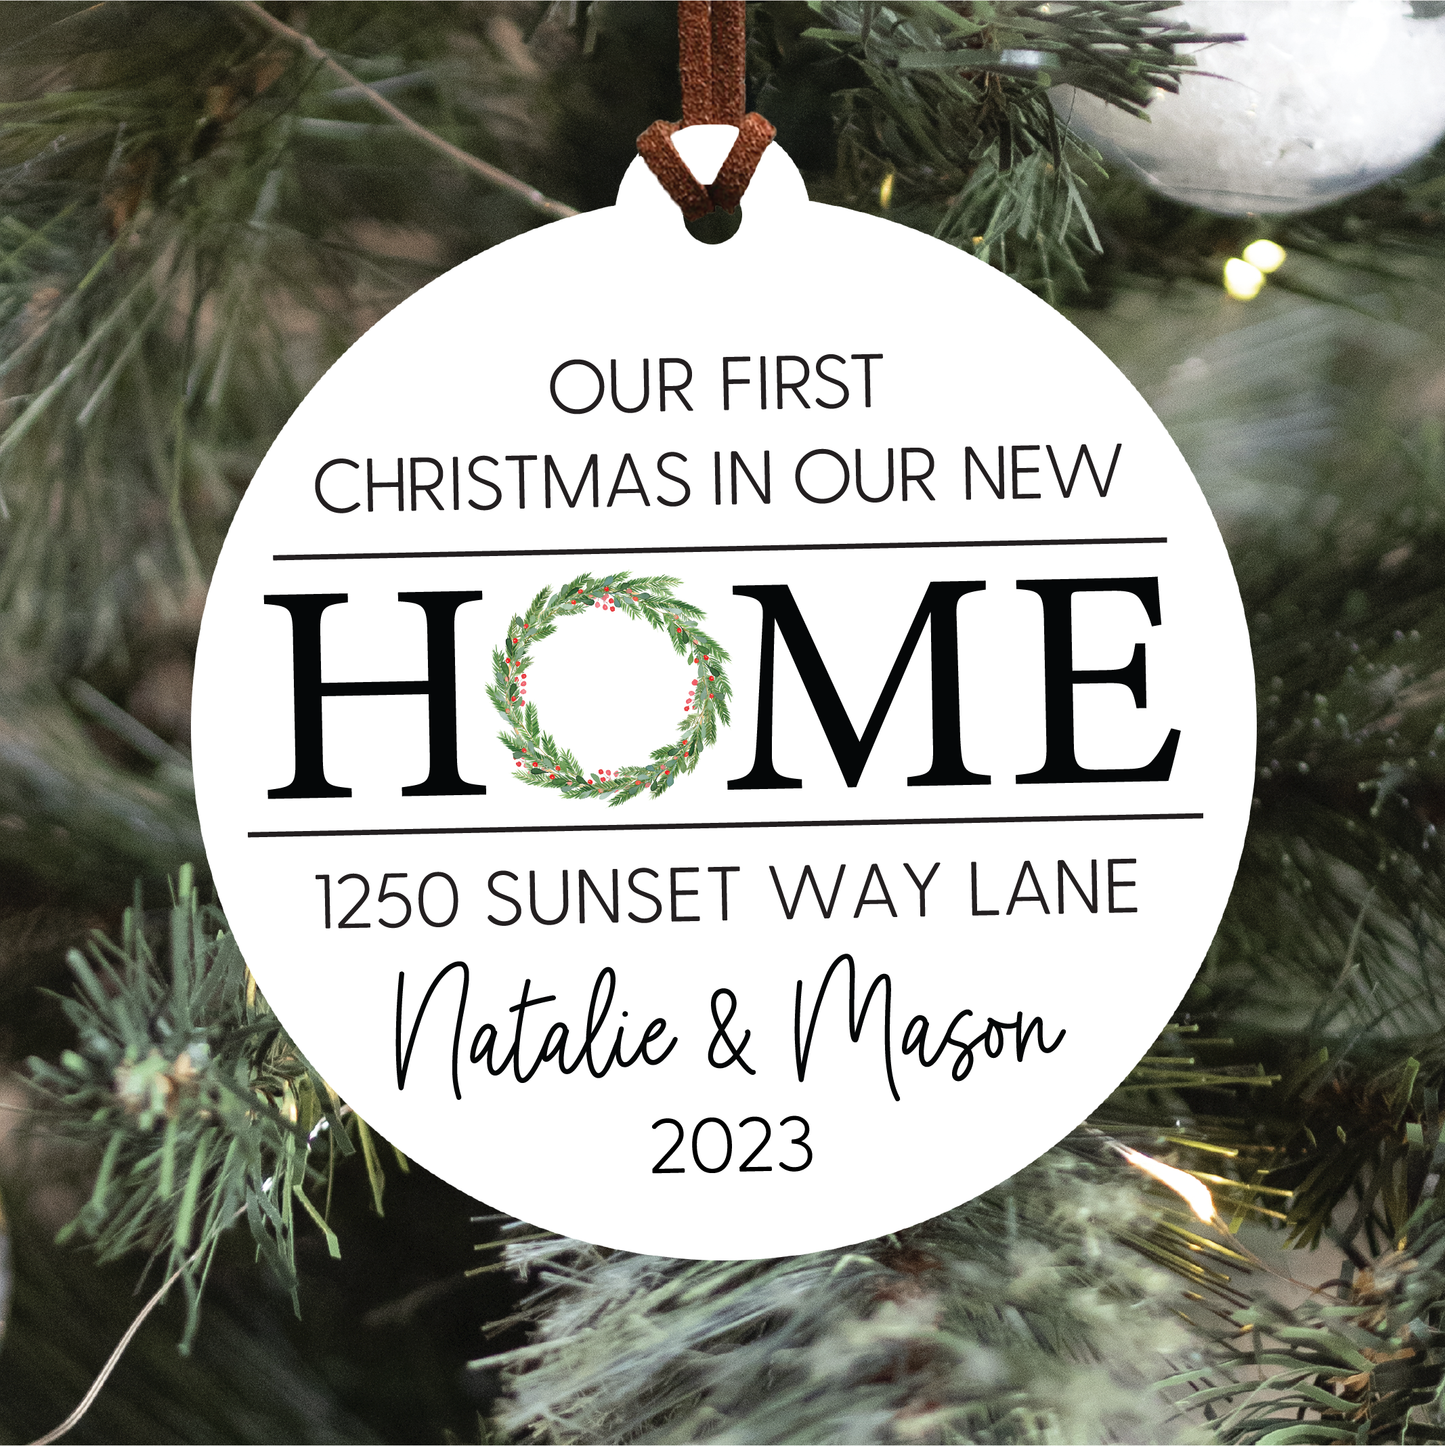 Personalized New Home Christmas Ornament | House or Round | V2 Wreath